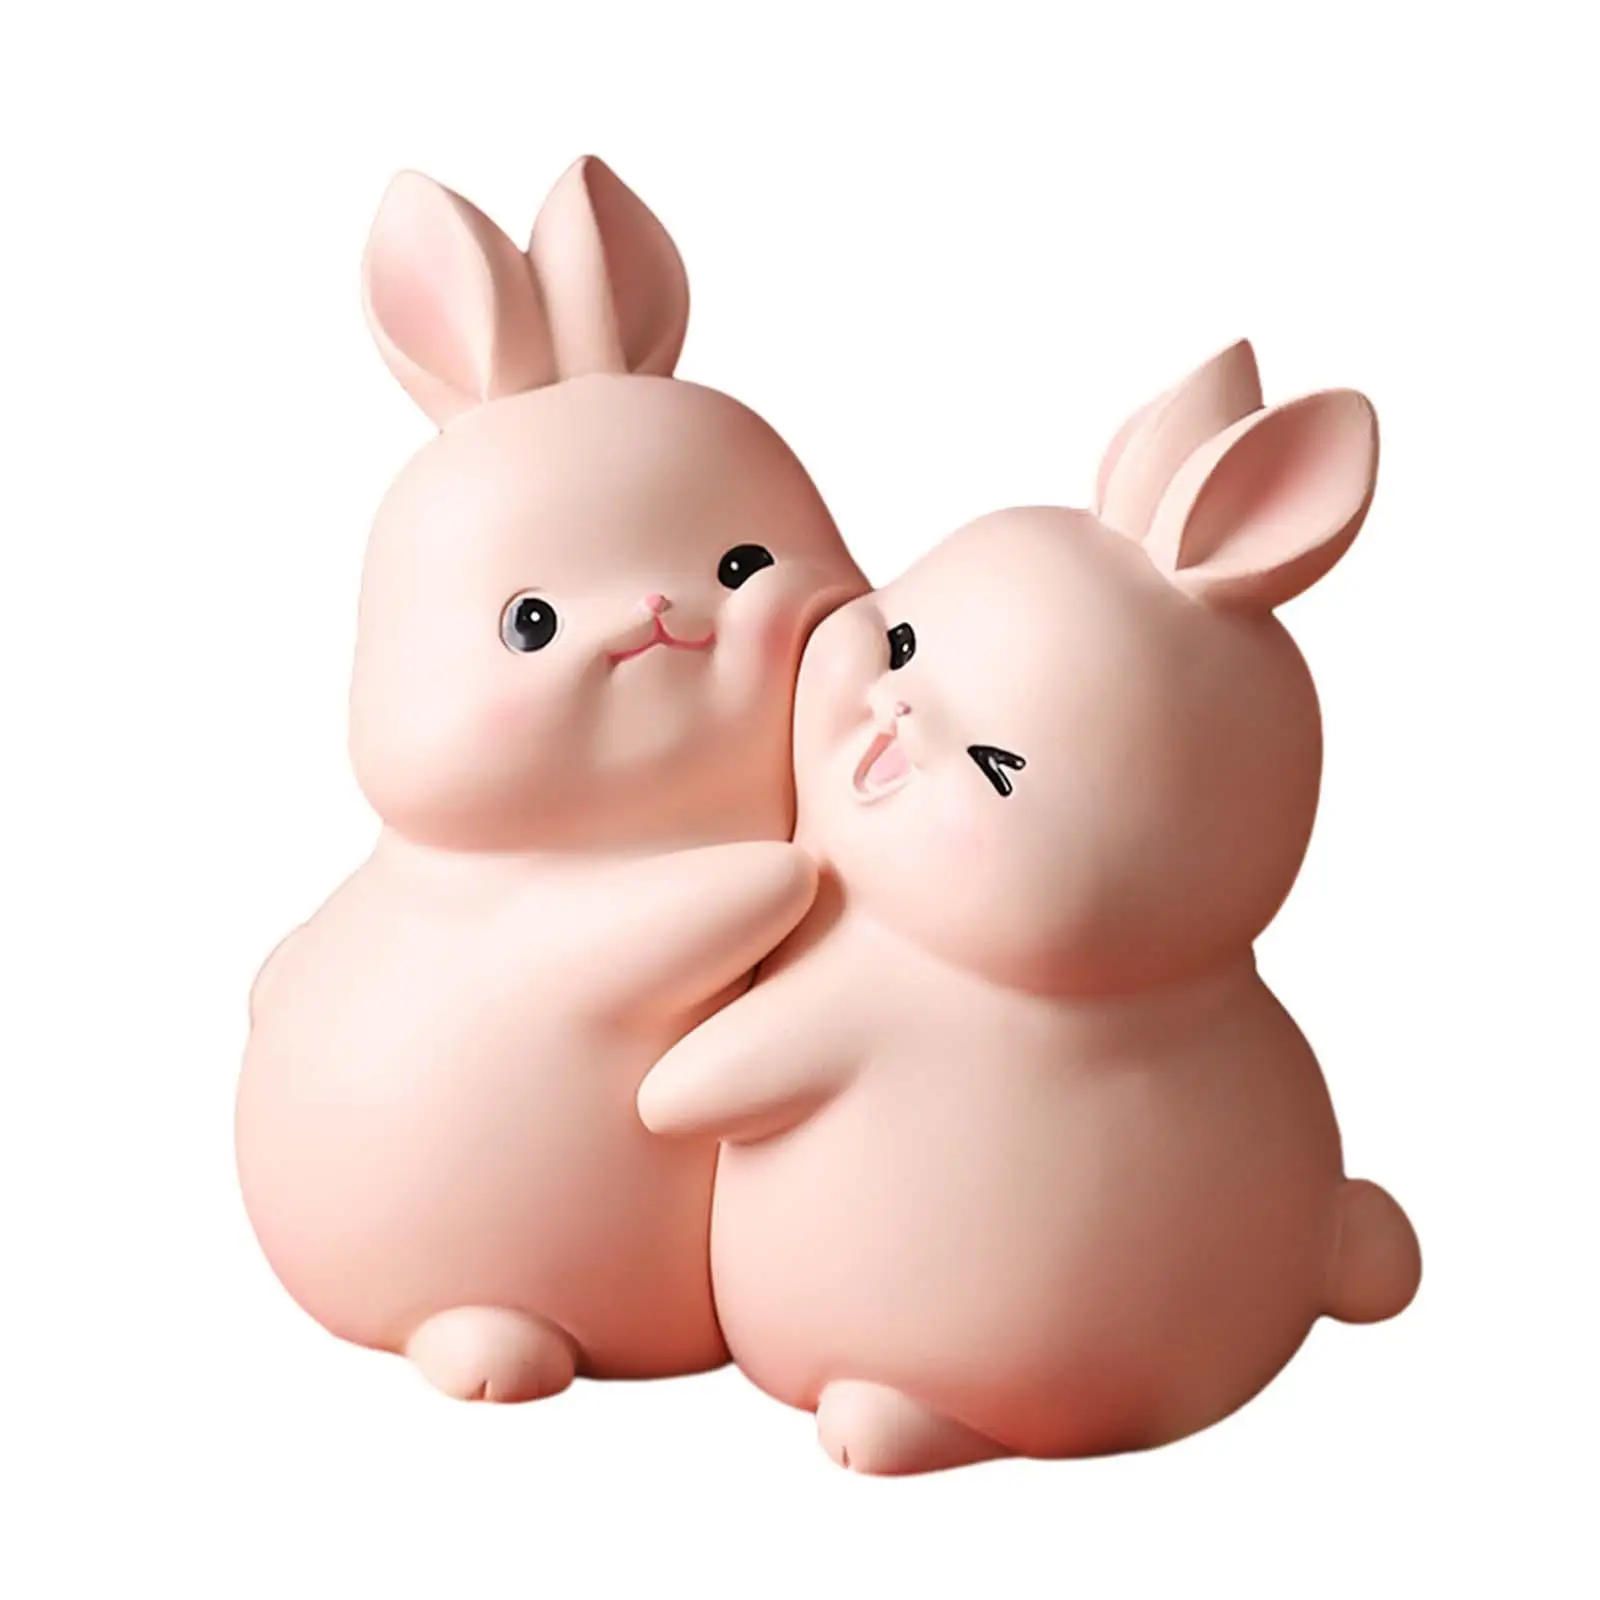 Rabbit Bookends Book Organizer Support Bunny Book Ends Stopper Decorative Bookends for Shelves Kids Rooms Cabinet Desk Ornaments